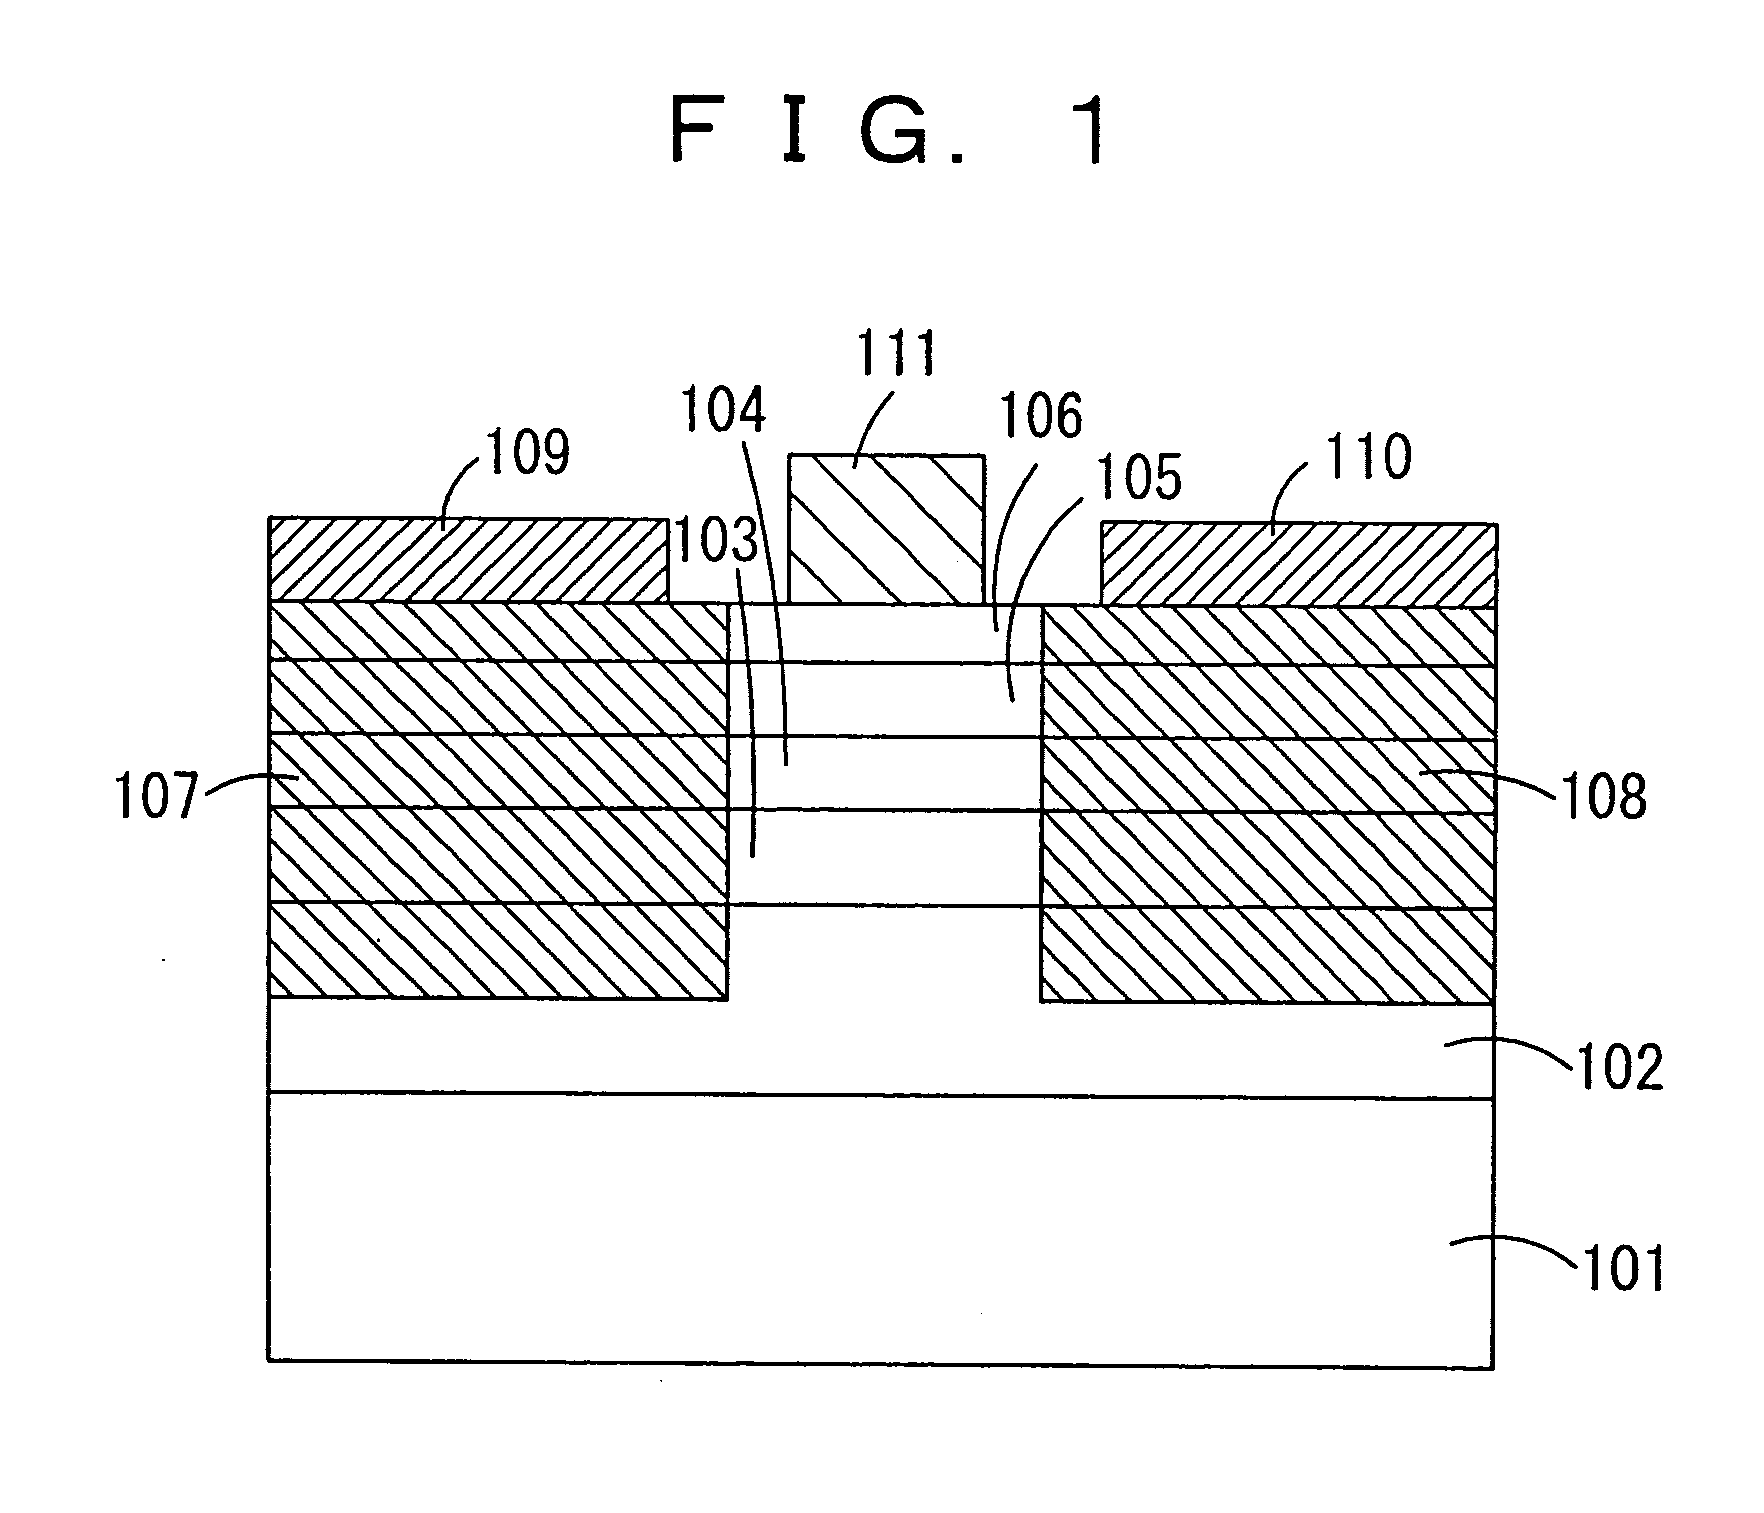 Heterojunction field effect transistor and manufacturing method thereof